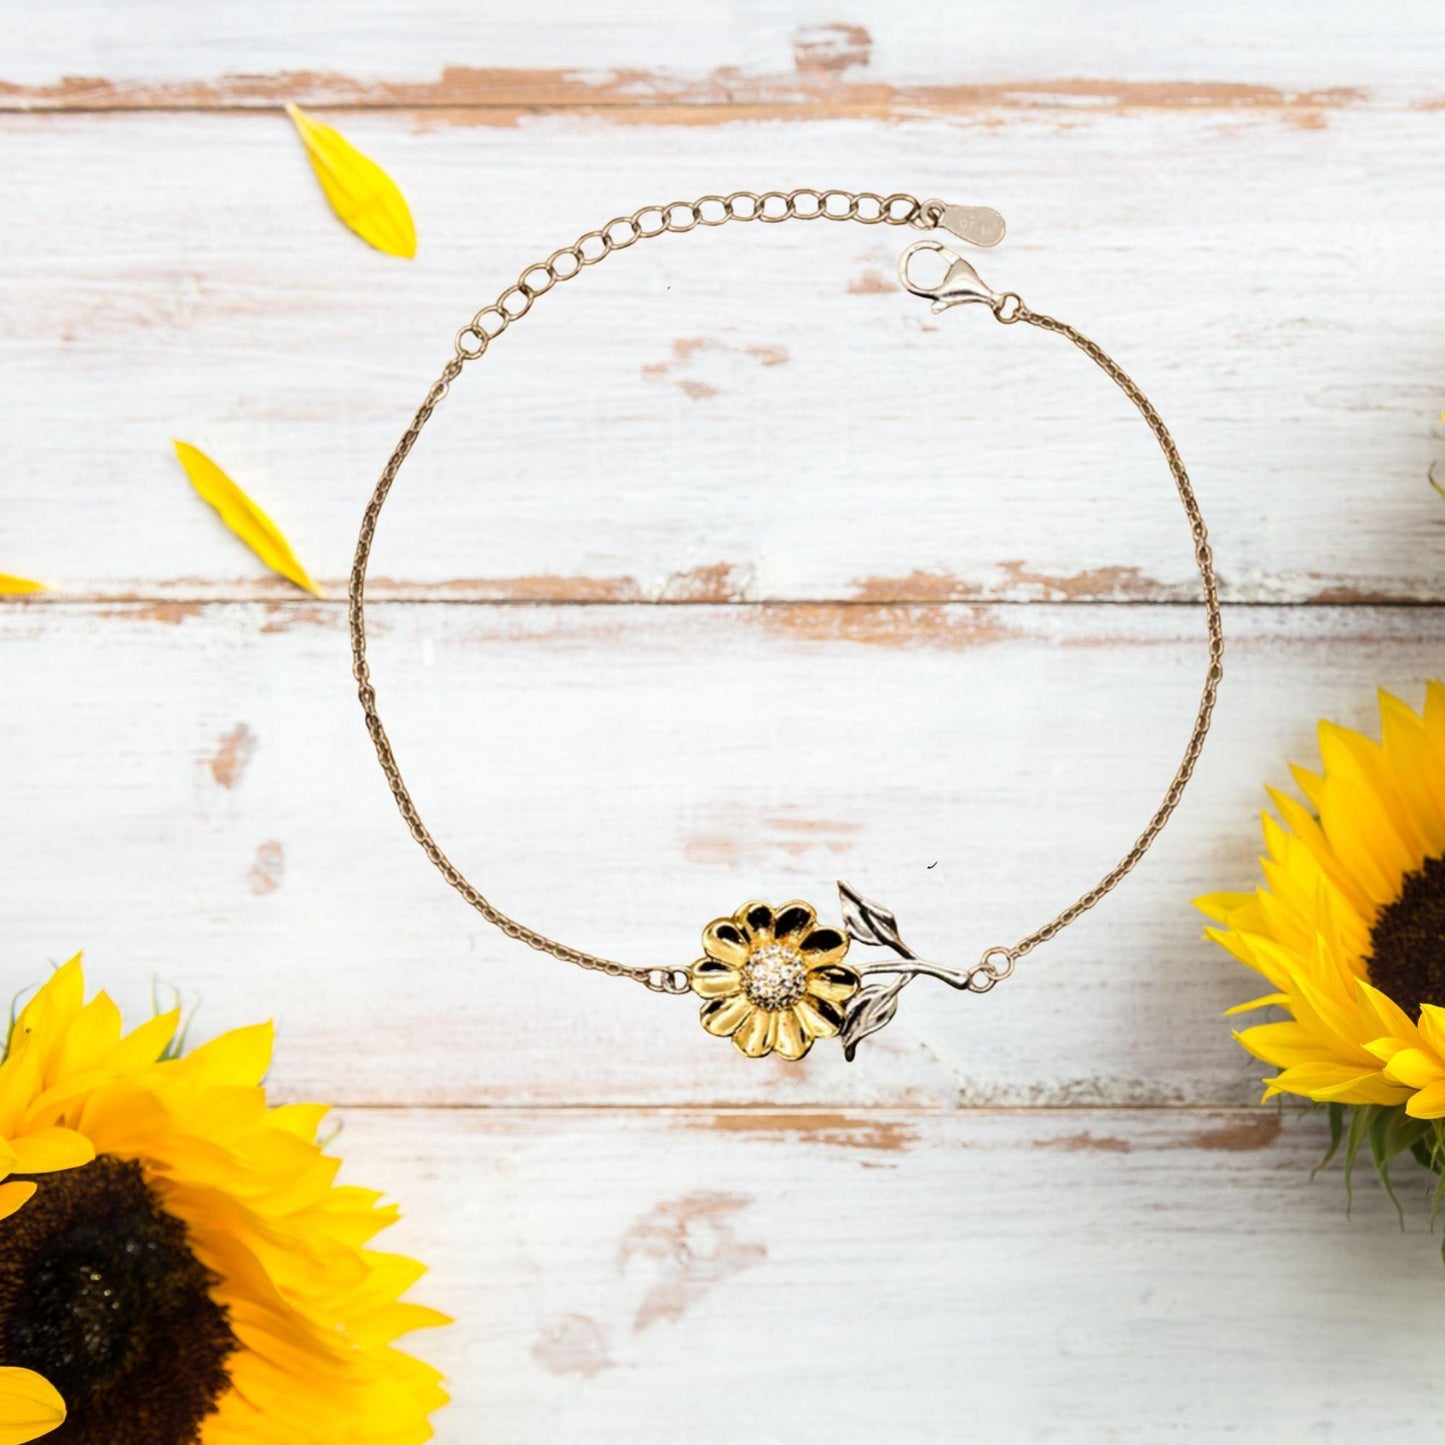 Coach Sunflower Bracelet - Thanks for being who you are - Birthday Christmas Jewelry Gifts Coworkers Colleague Boss - Mallard Moon Gift Shop